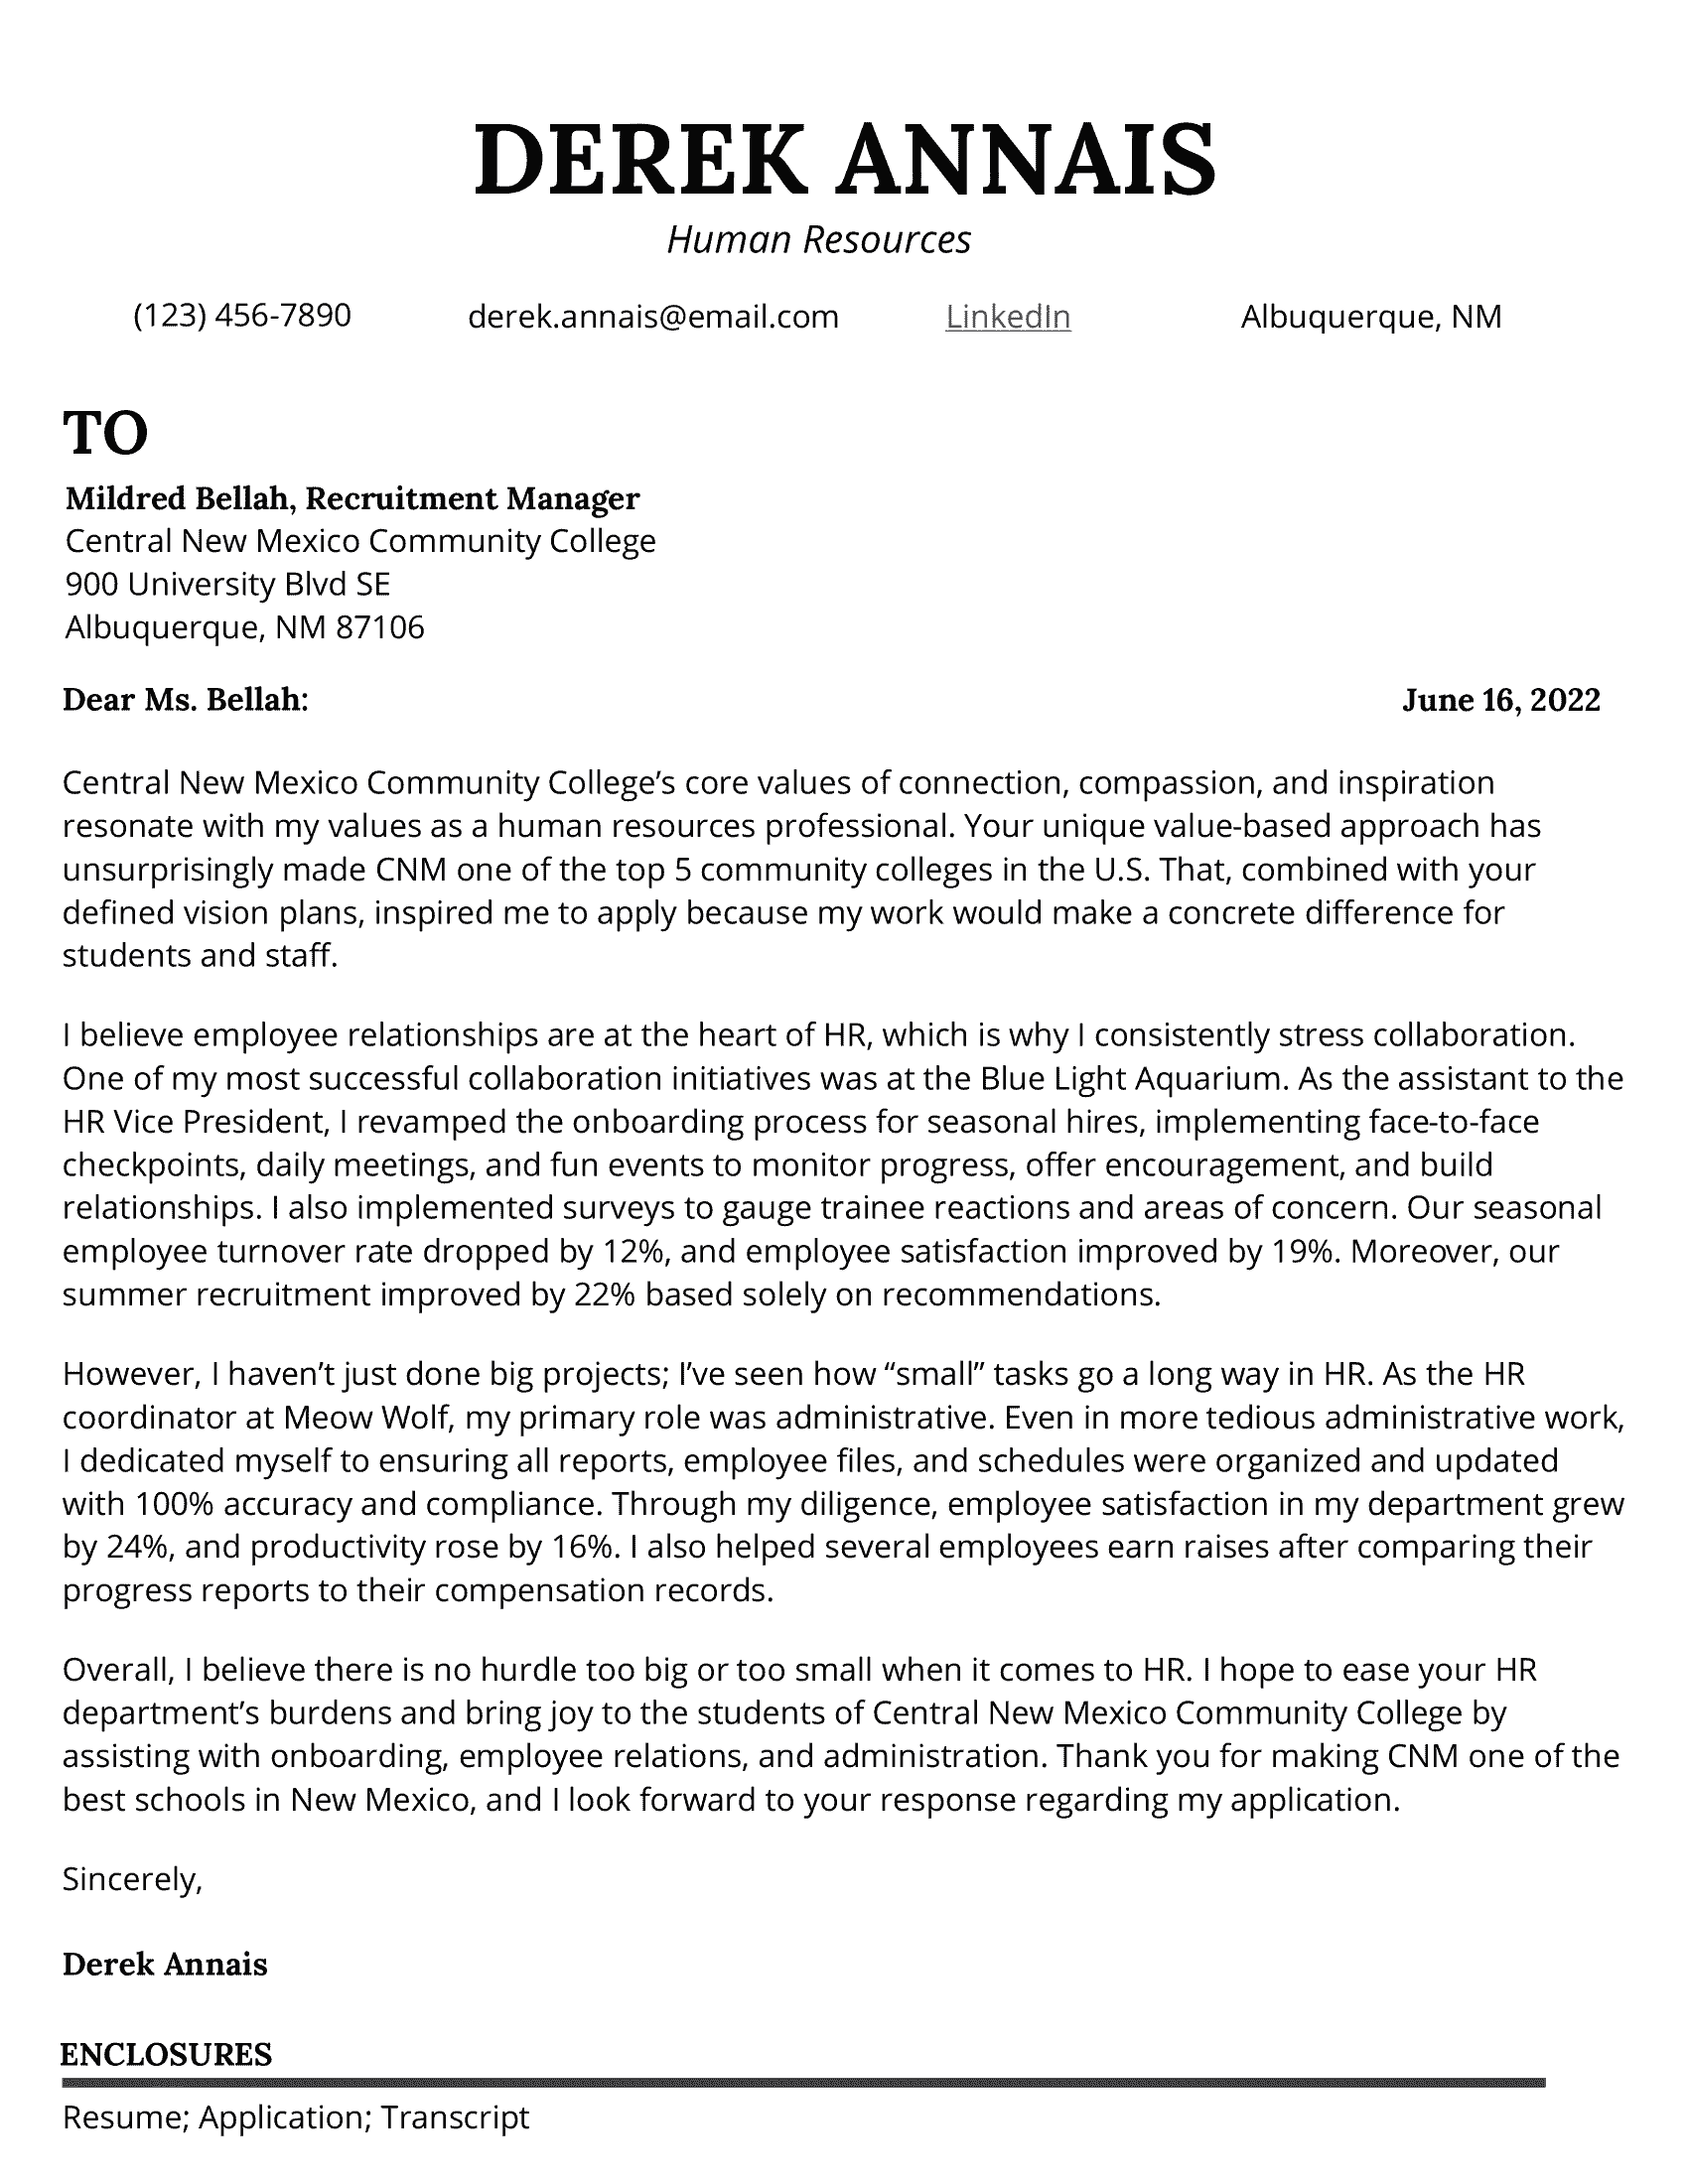 Human resources cover letter example